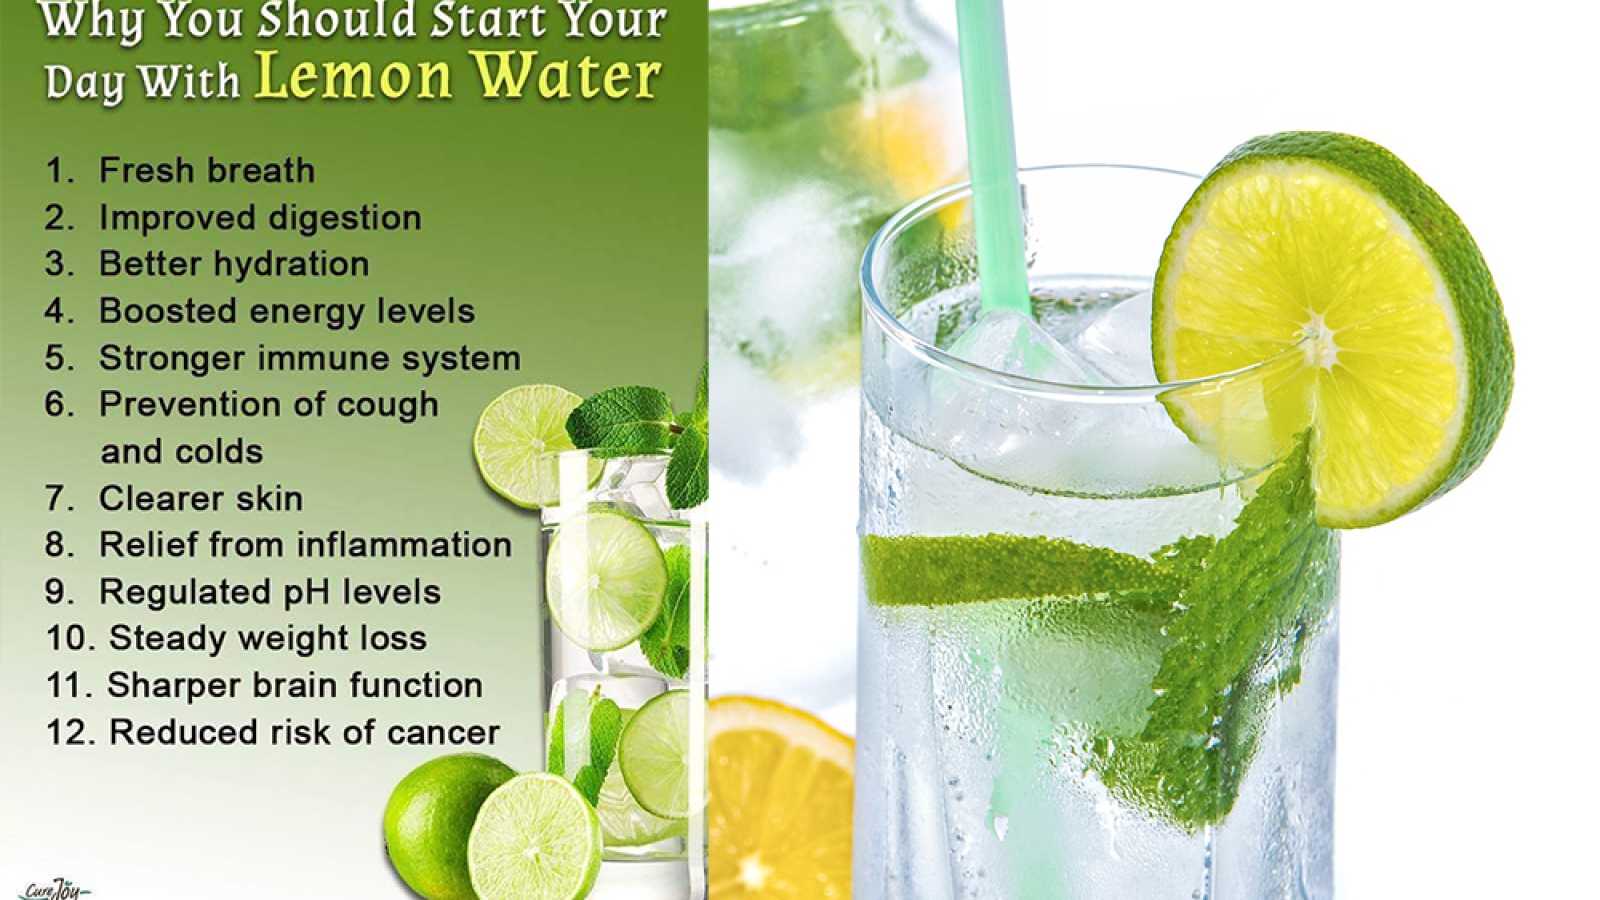 Why You Should Start Your Day With Lemon Water